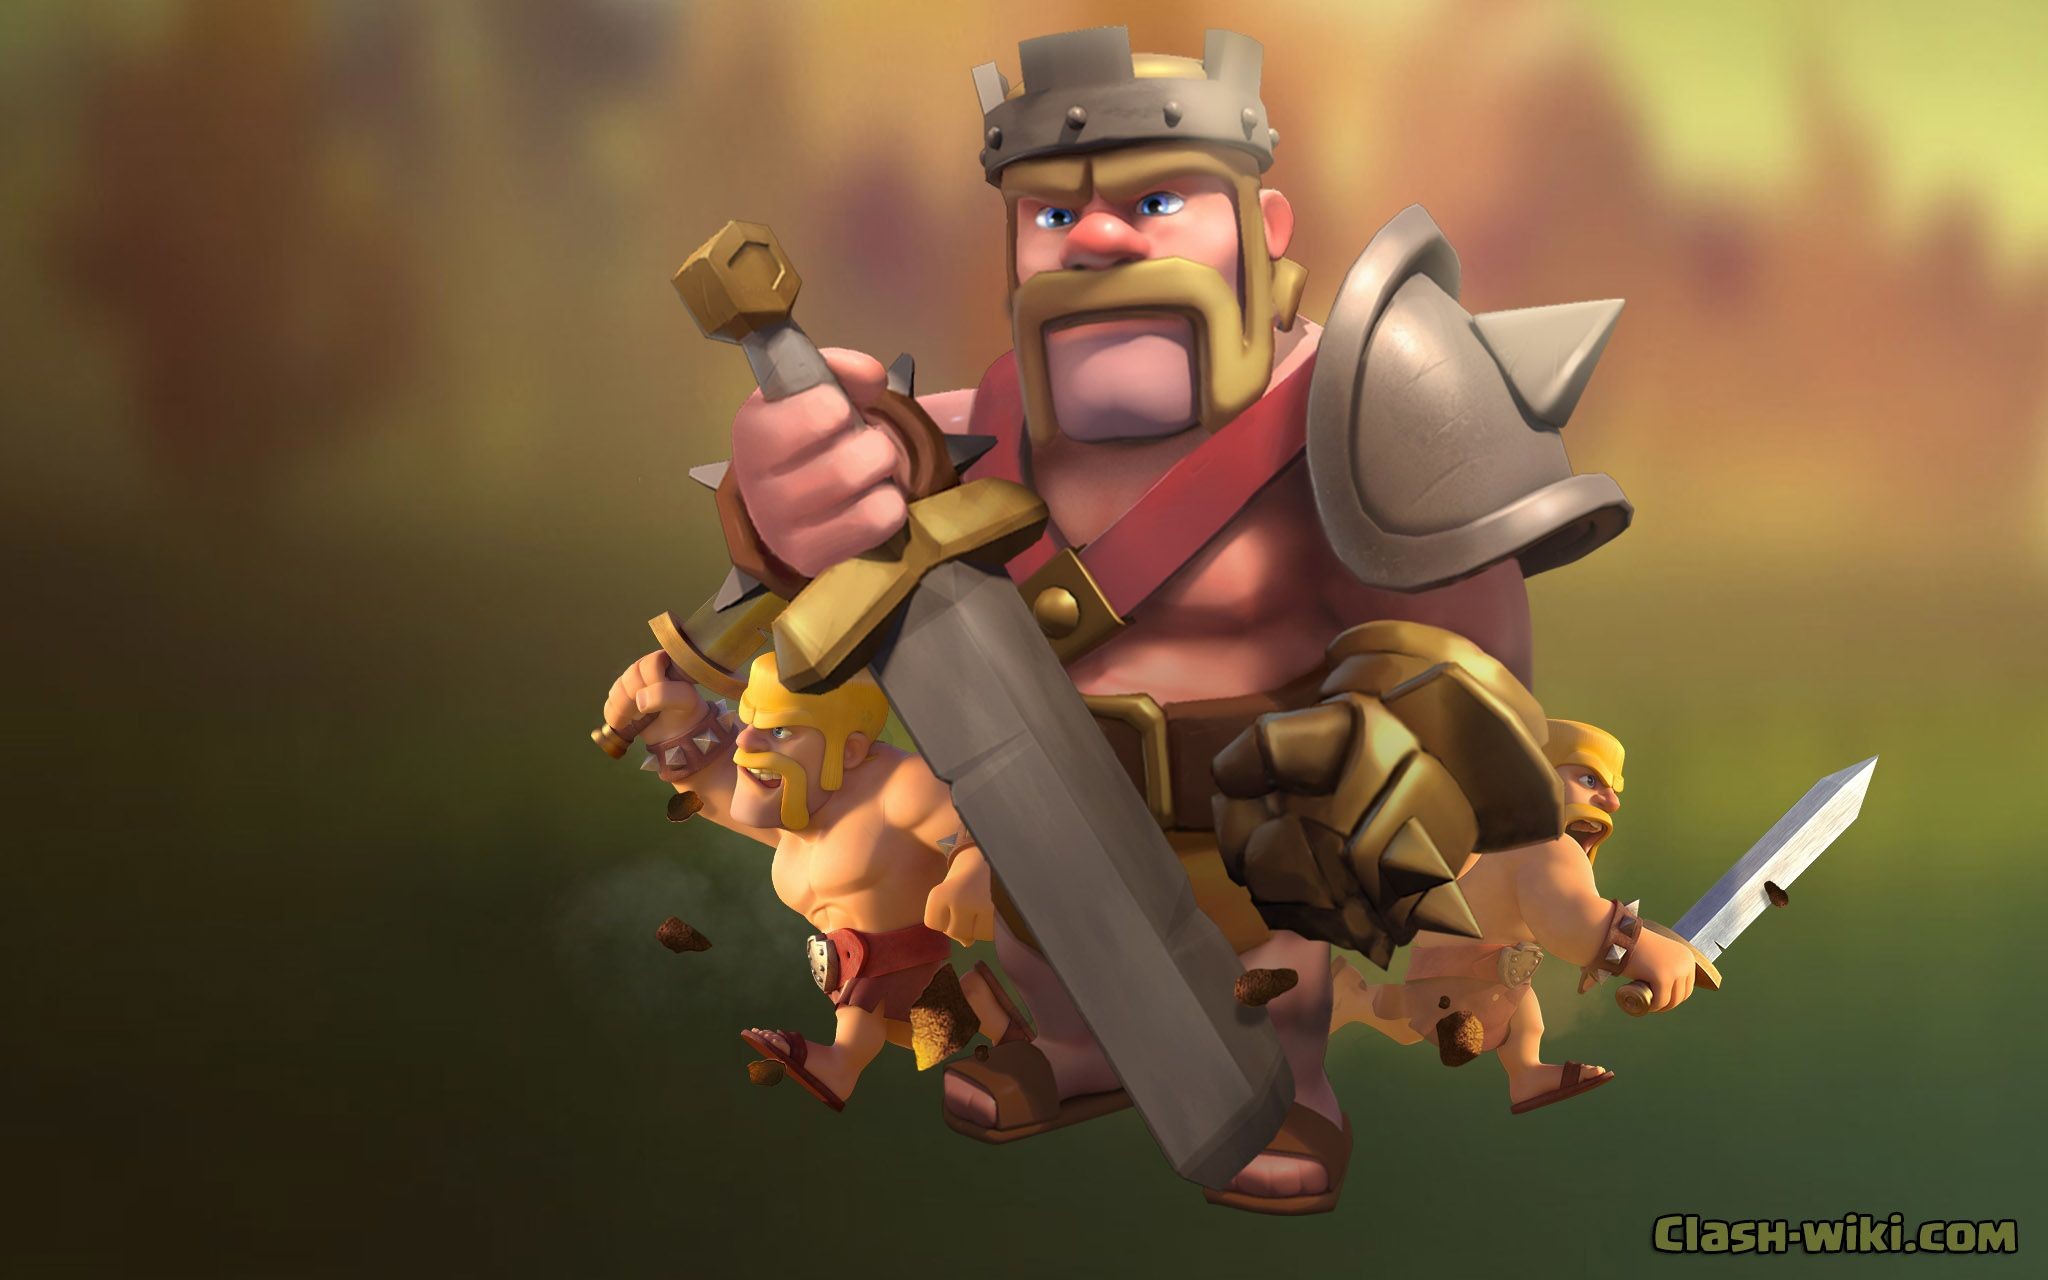 2048x1280 Clash of Clans | Wallpapers | clash-wiki.com